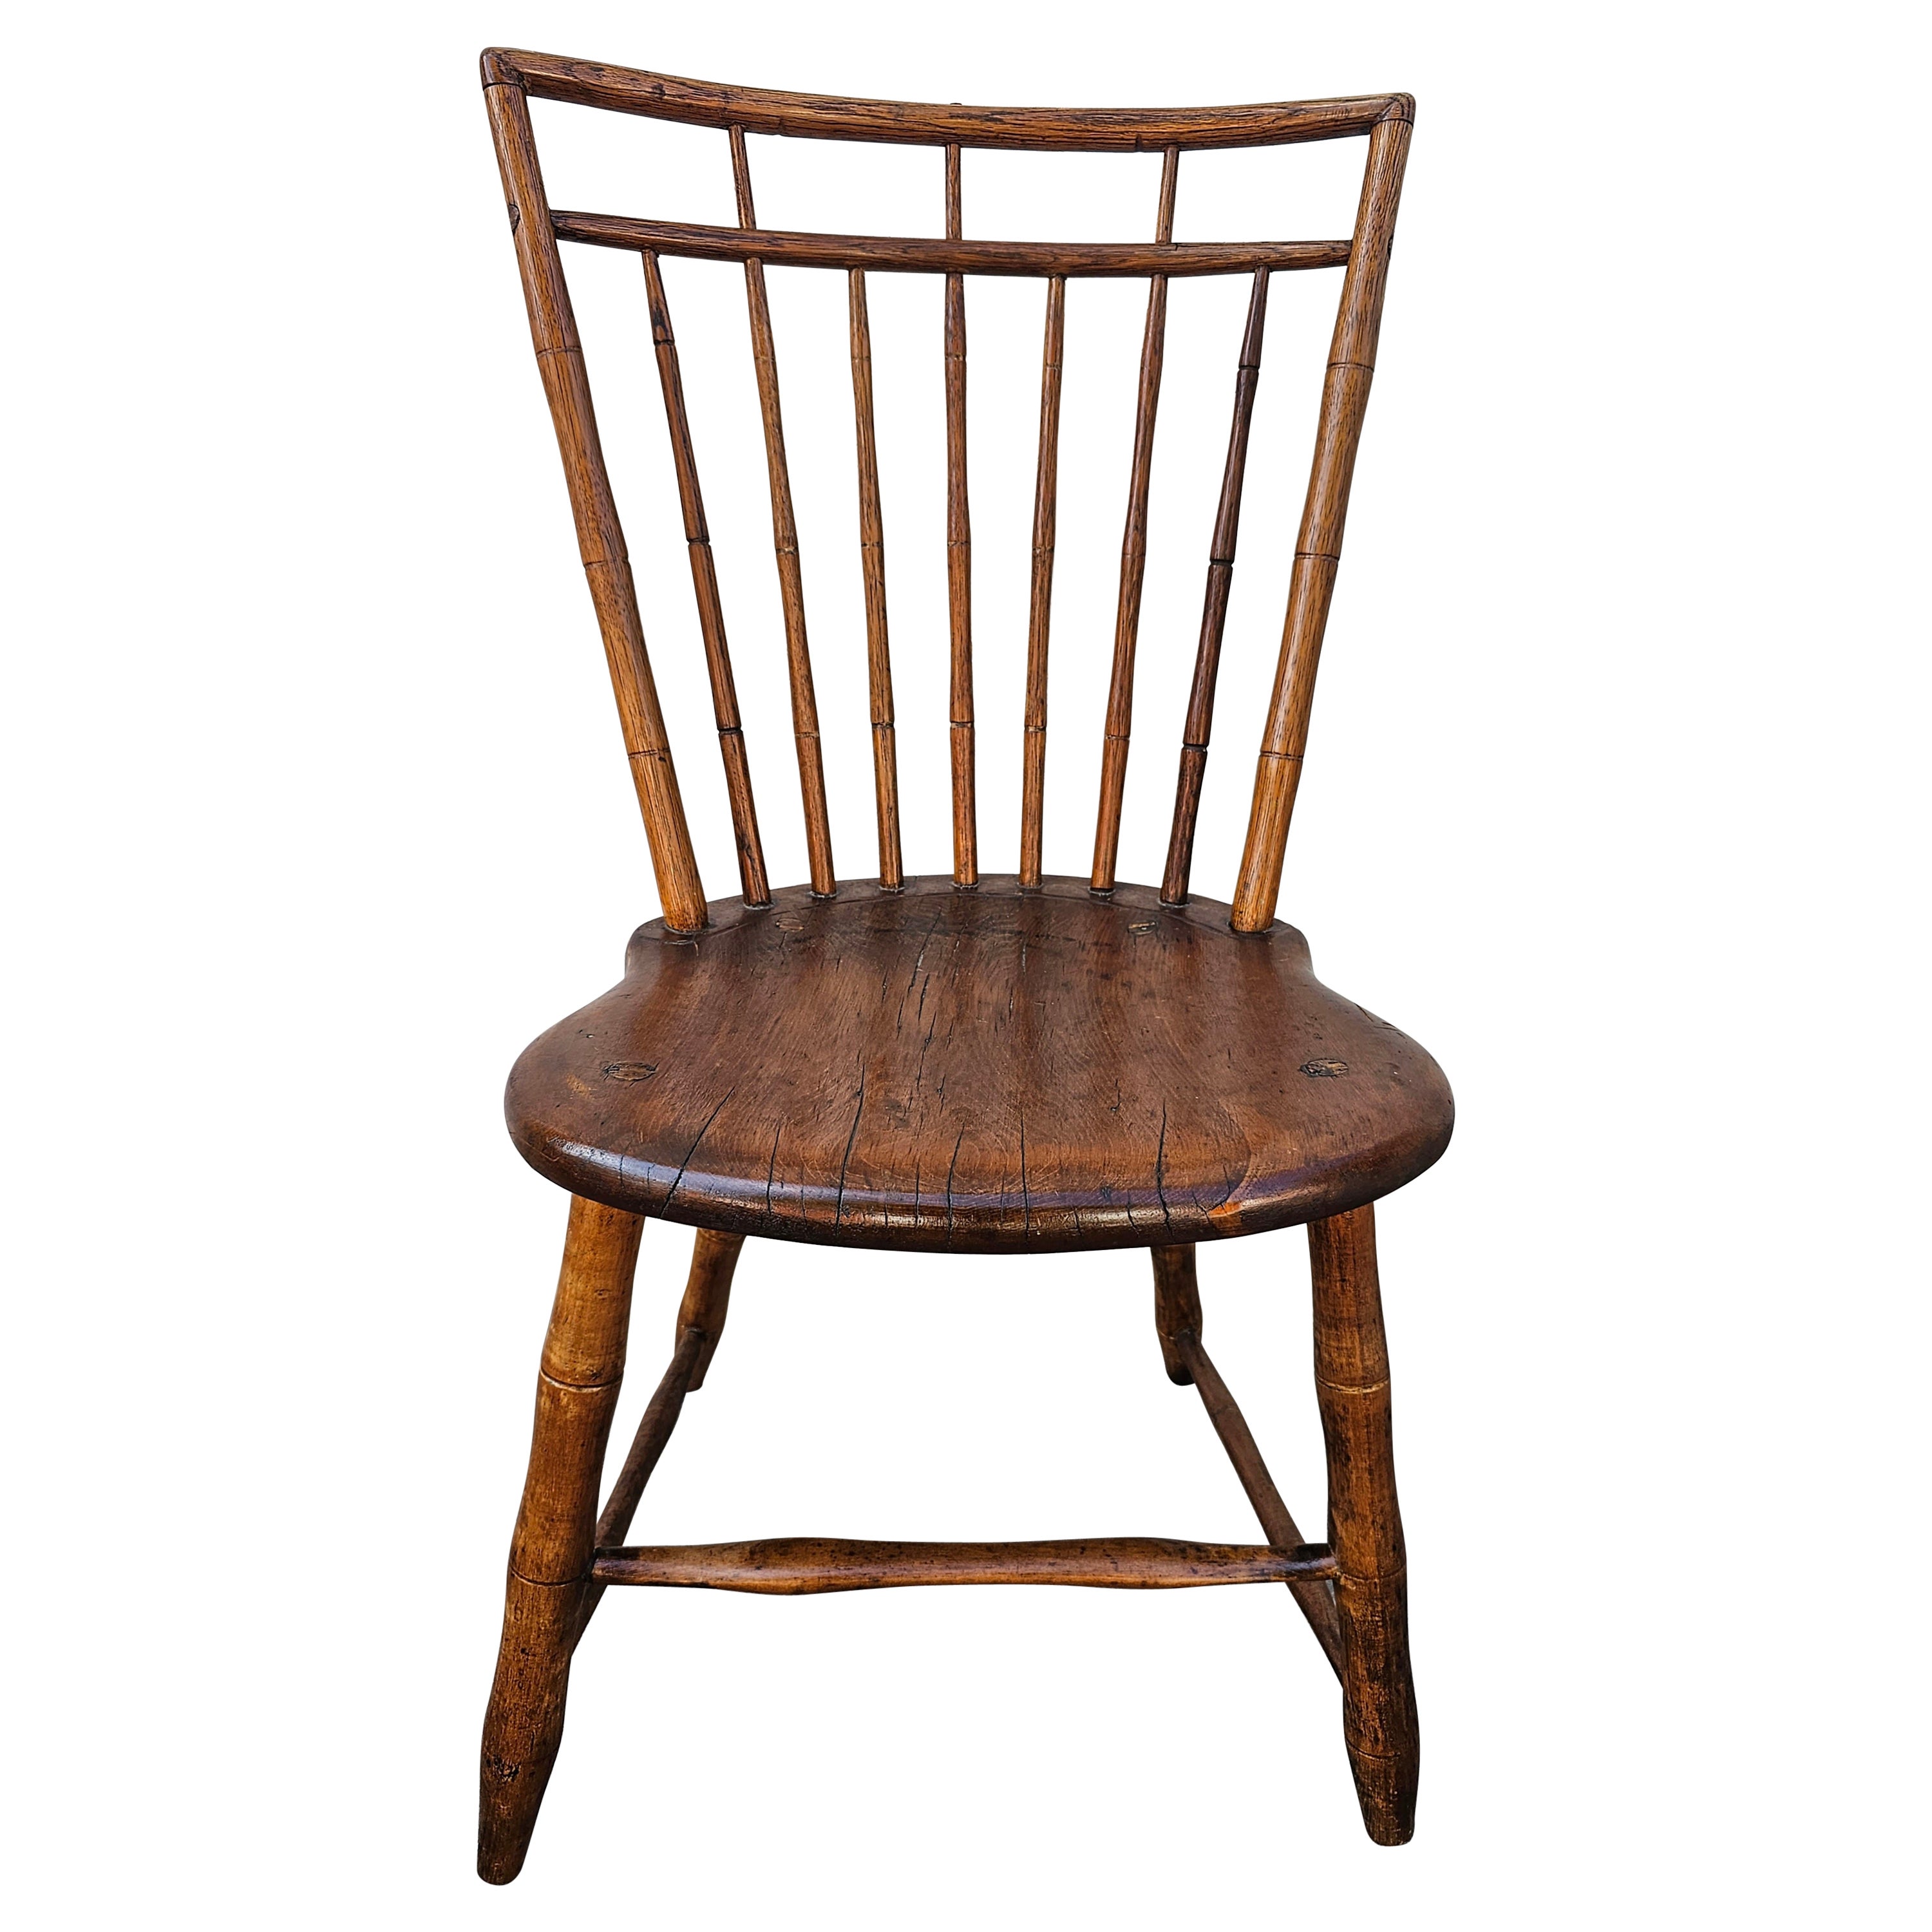 19th Century Early American Elm Windsor Plank Chair For Sale